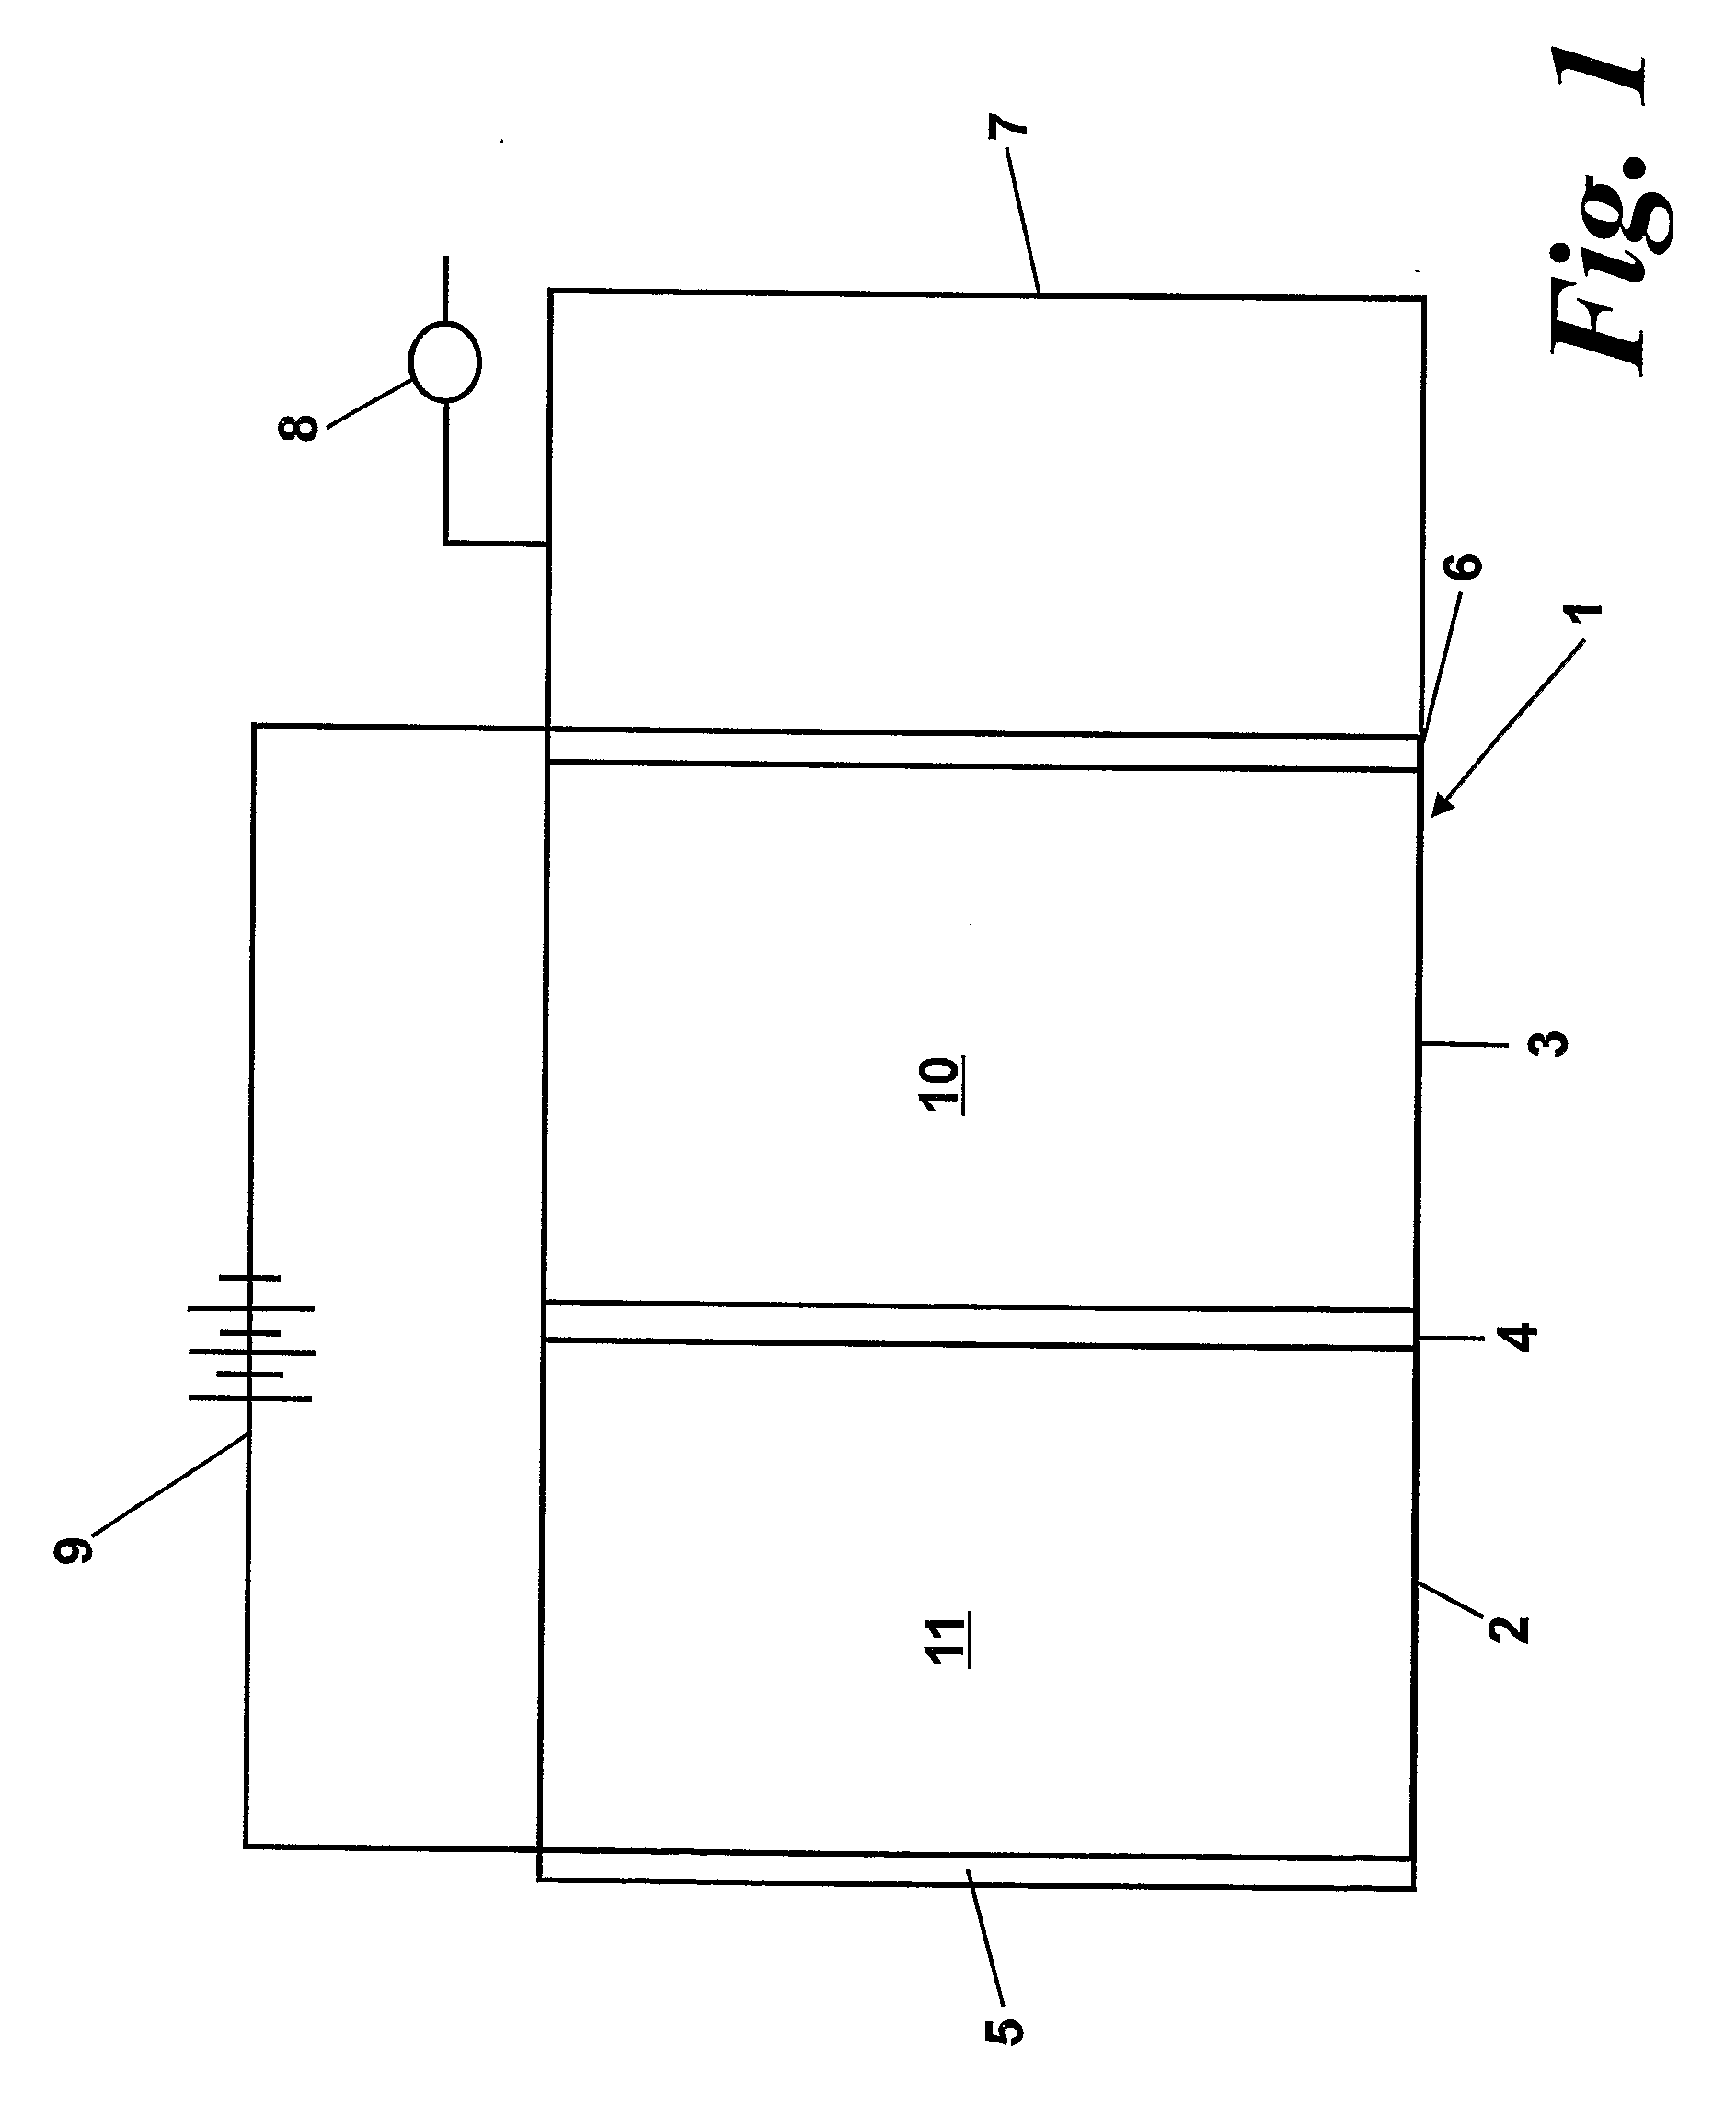 Method and apparatus for producing hydrogen peroxide